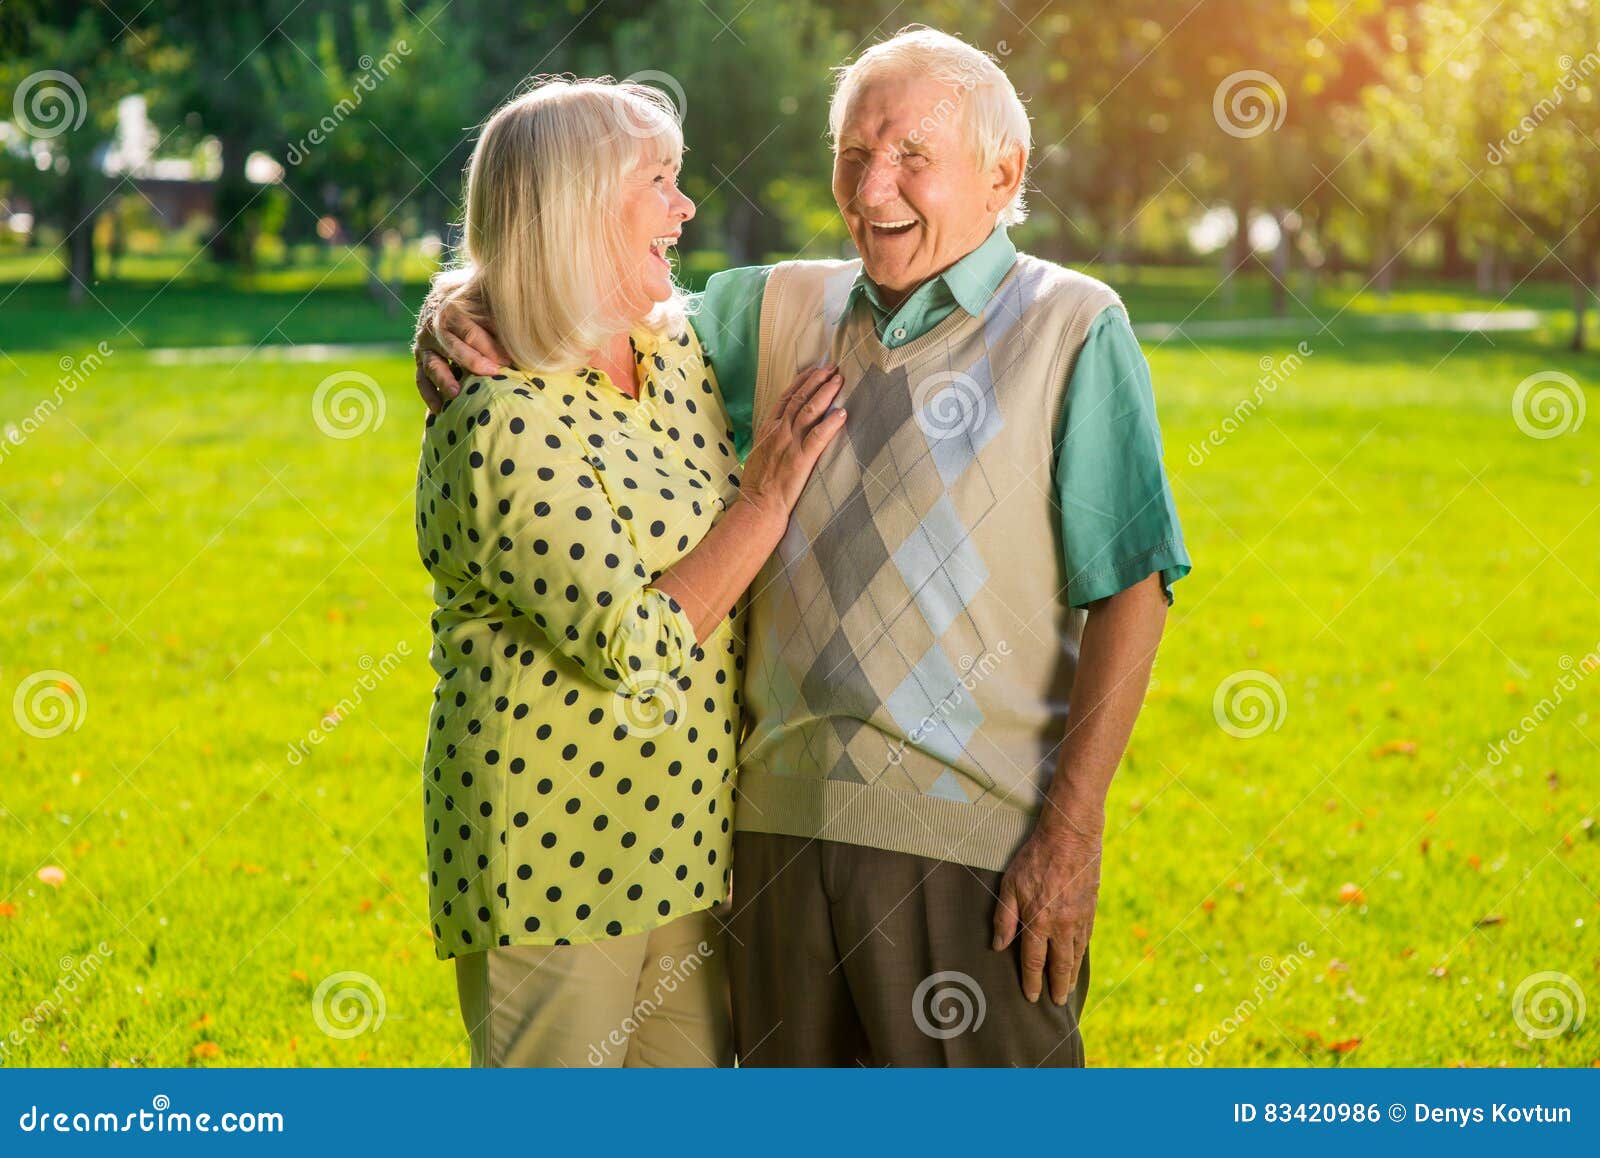 7 Couple Humour Photos Free Royalty Free Stock Photos From Dreamstime